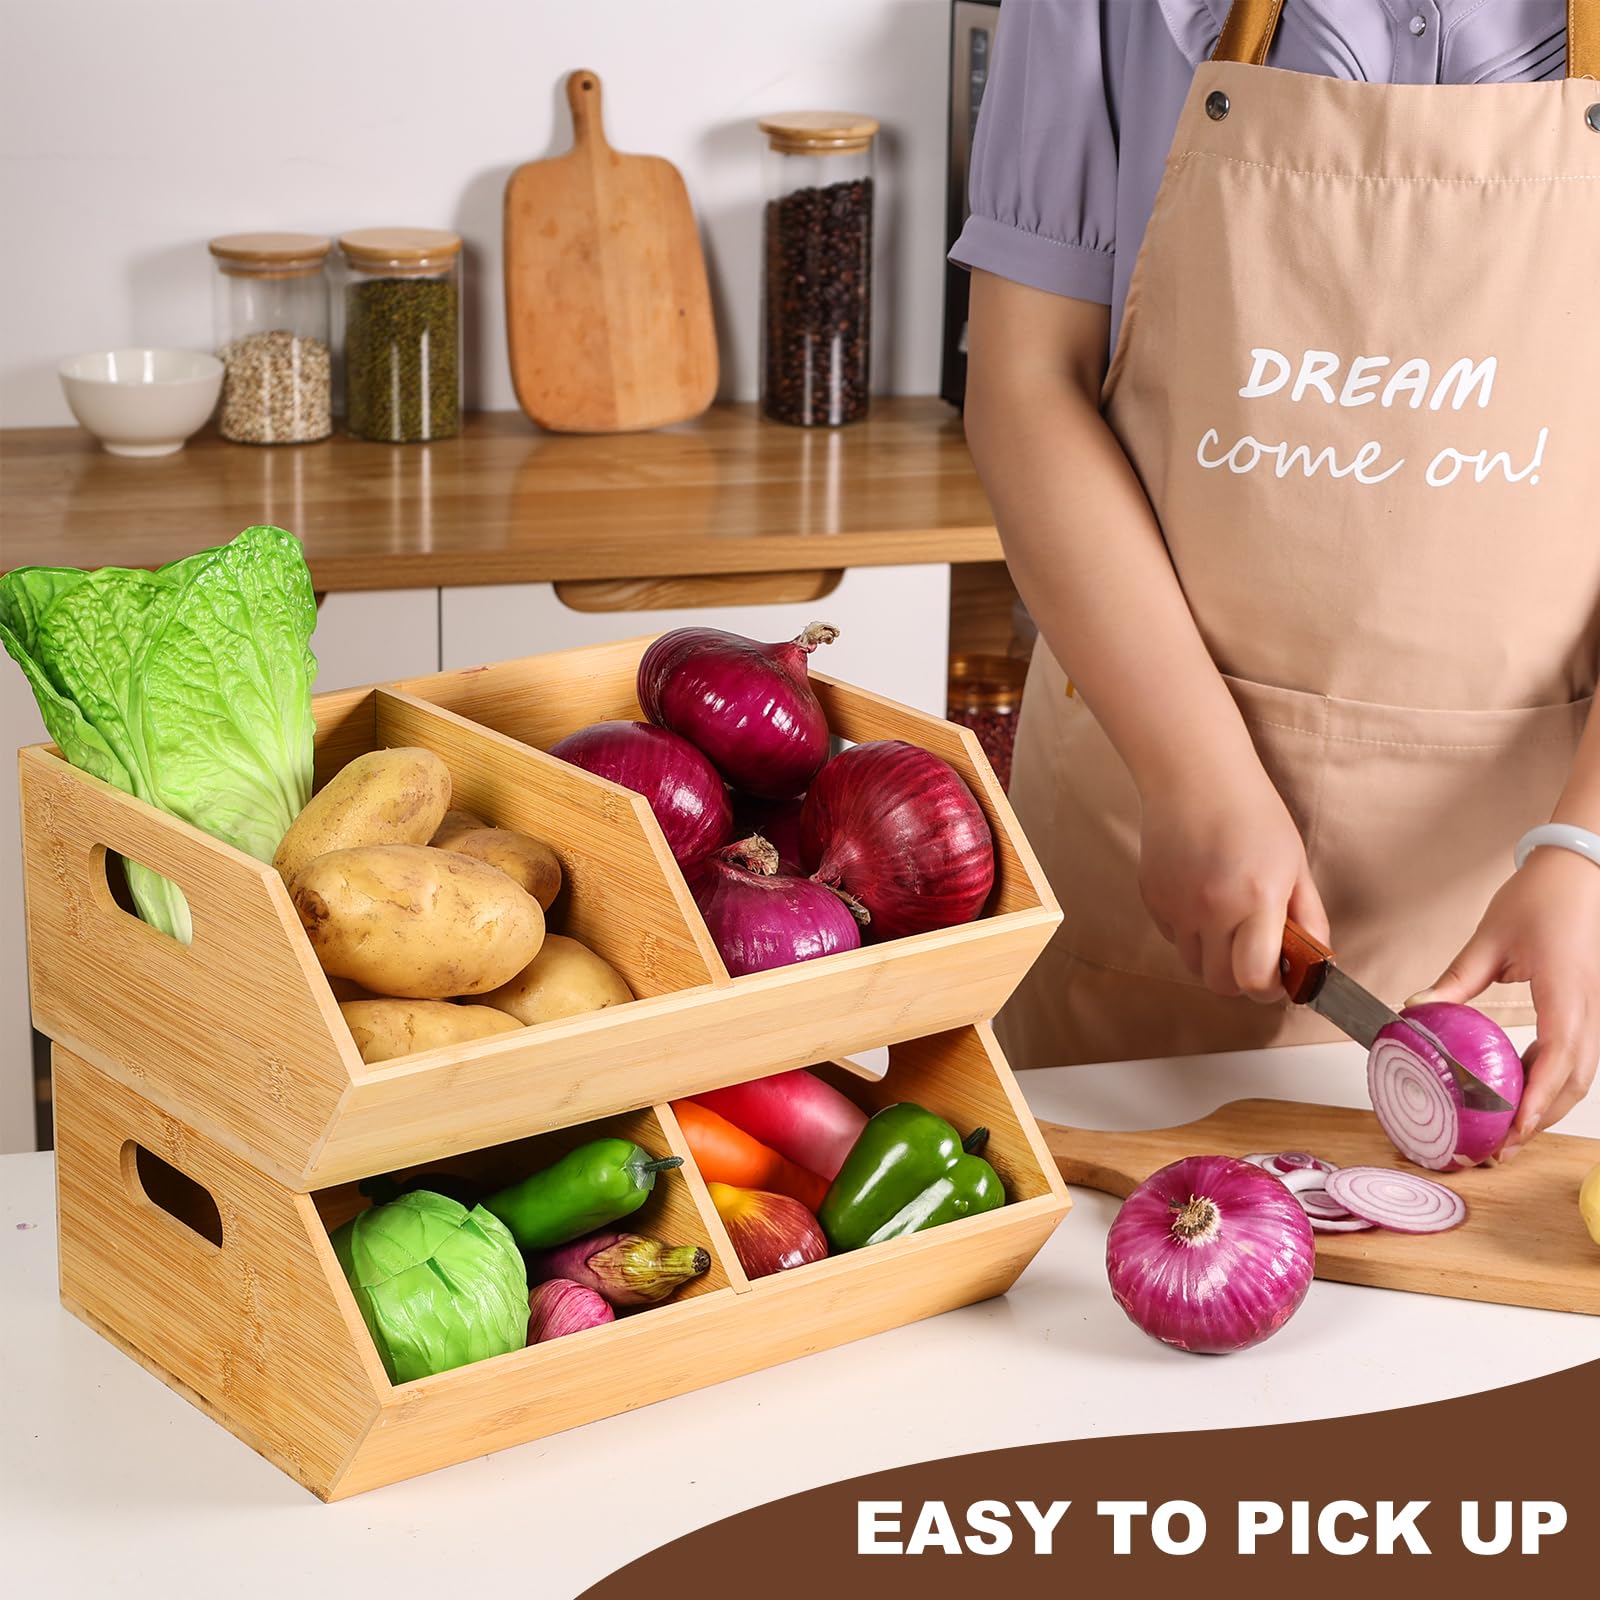 BYOA Official 2 Set Bamboo Storage Bins, Pantry Organizers and Storage, Kitchen Countertop Organization and Storage Basket for Produce, Onions, Potatoes, Garlic, Fruits, Vegetable and Bread